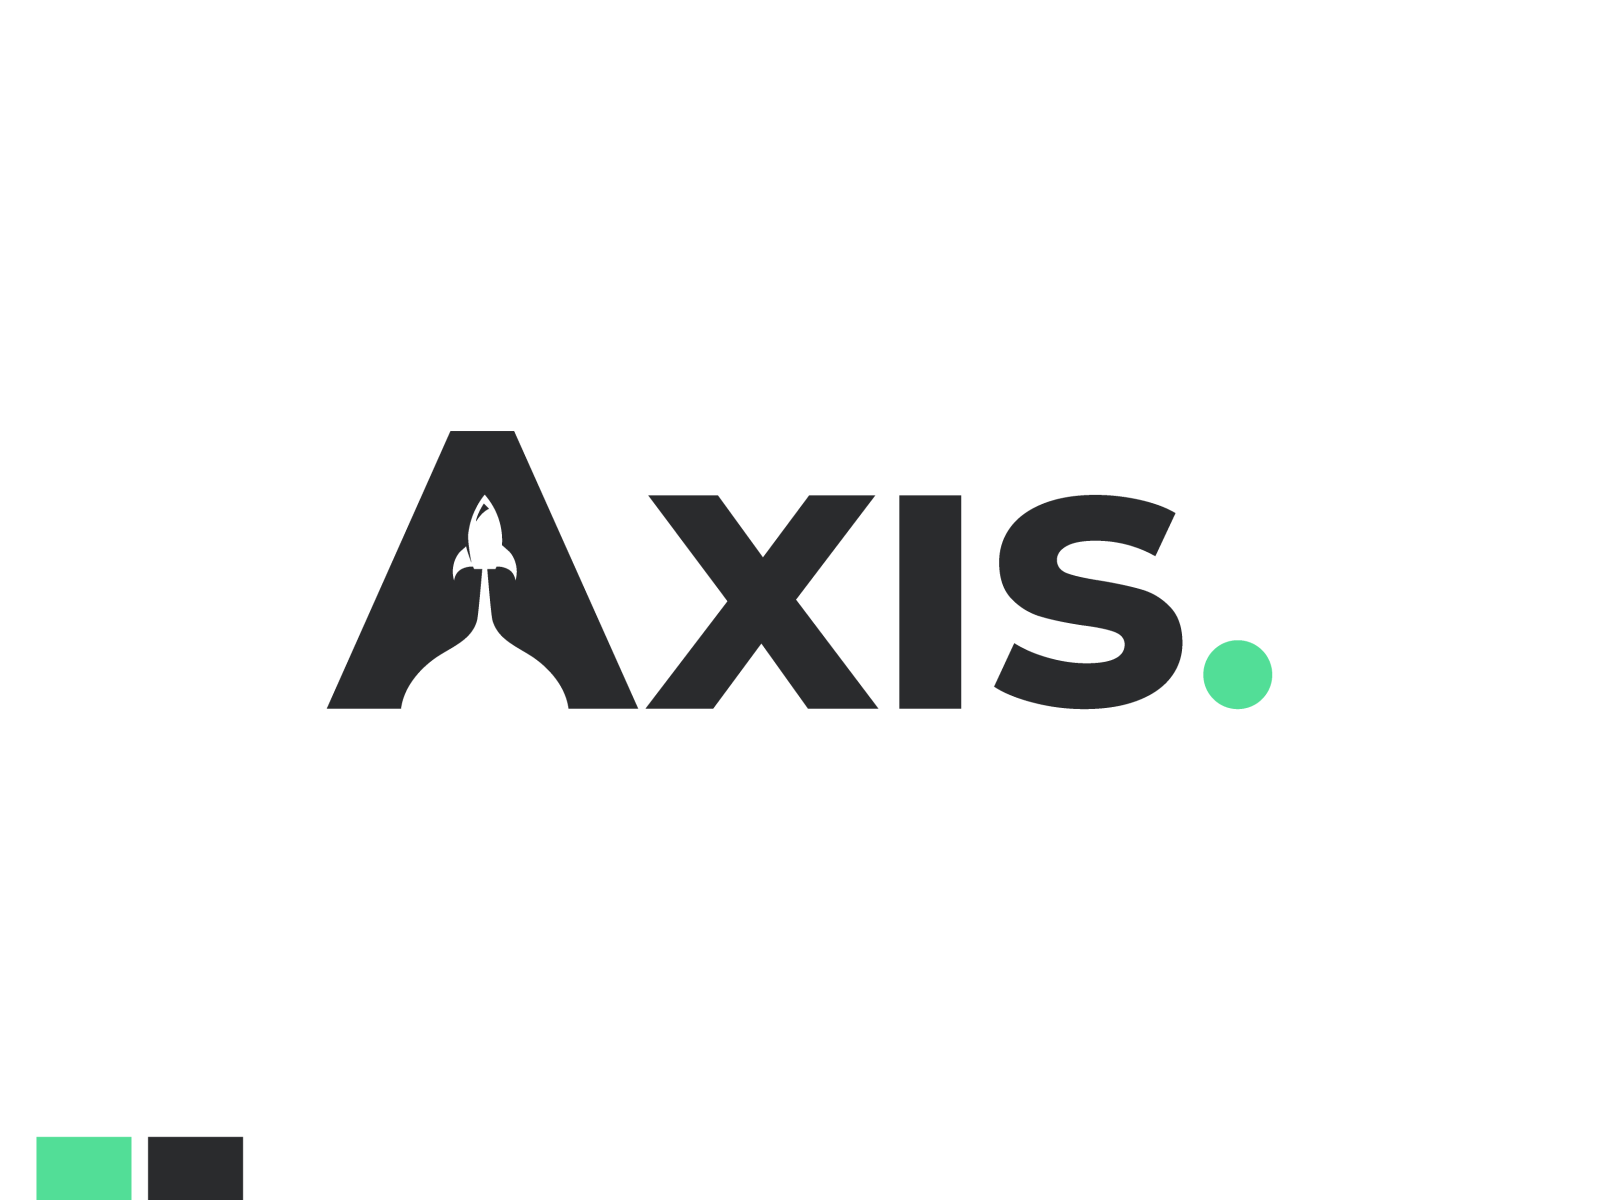 Axis - Daily logo Challenge by Stéphanie Leroy on Dribbble